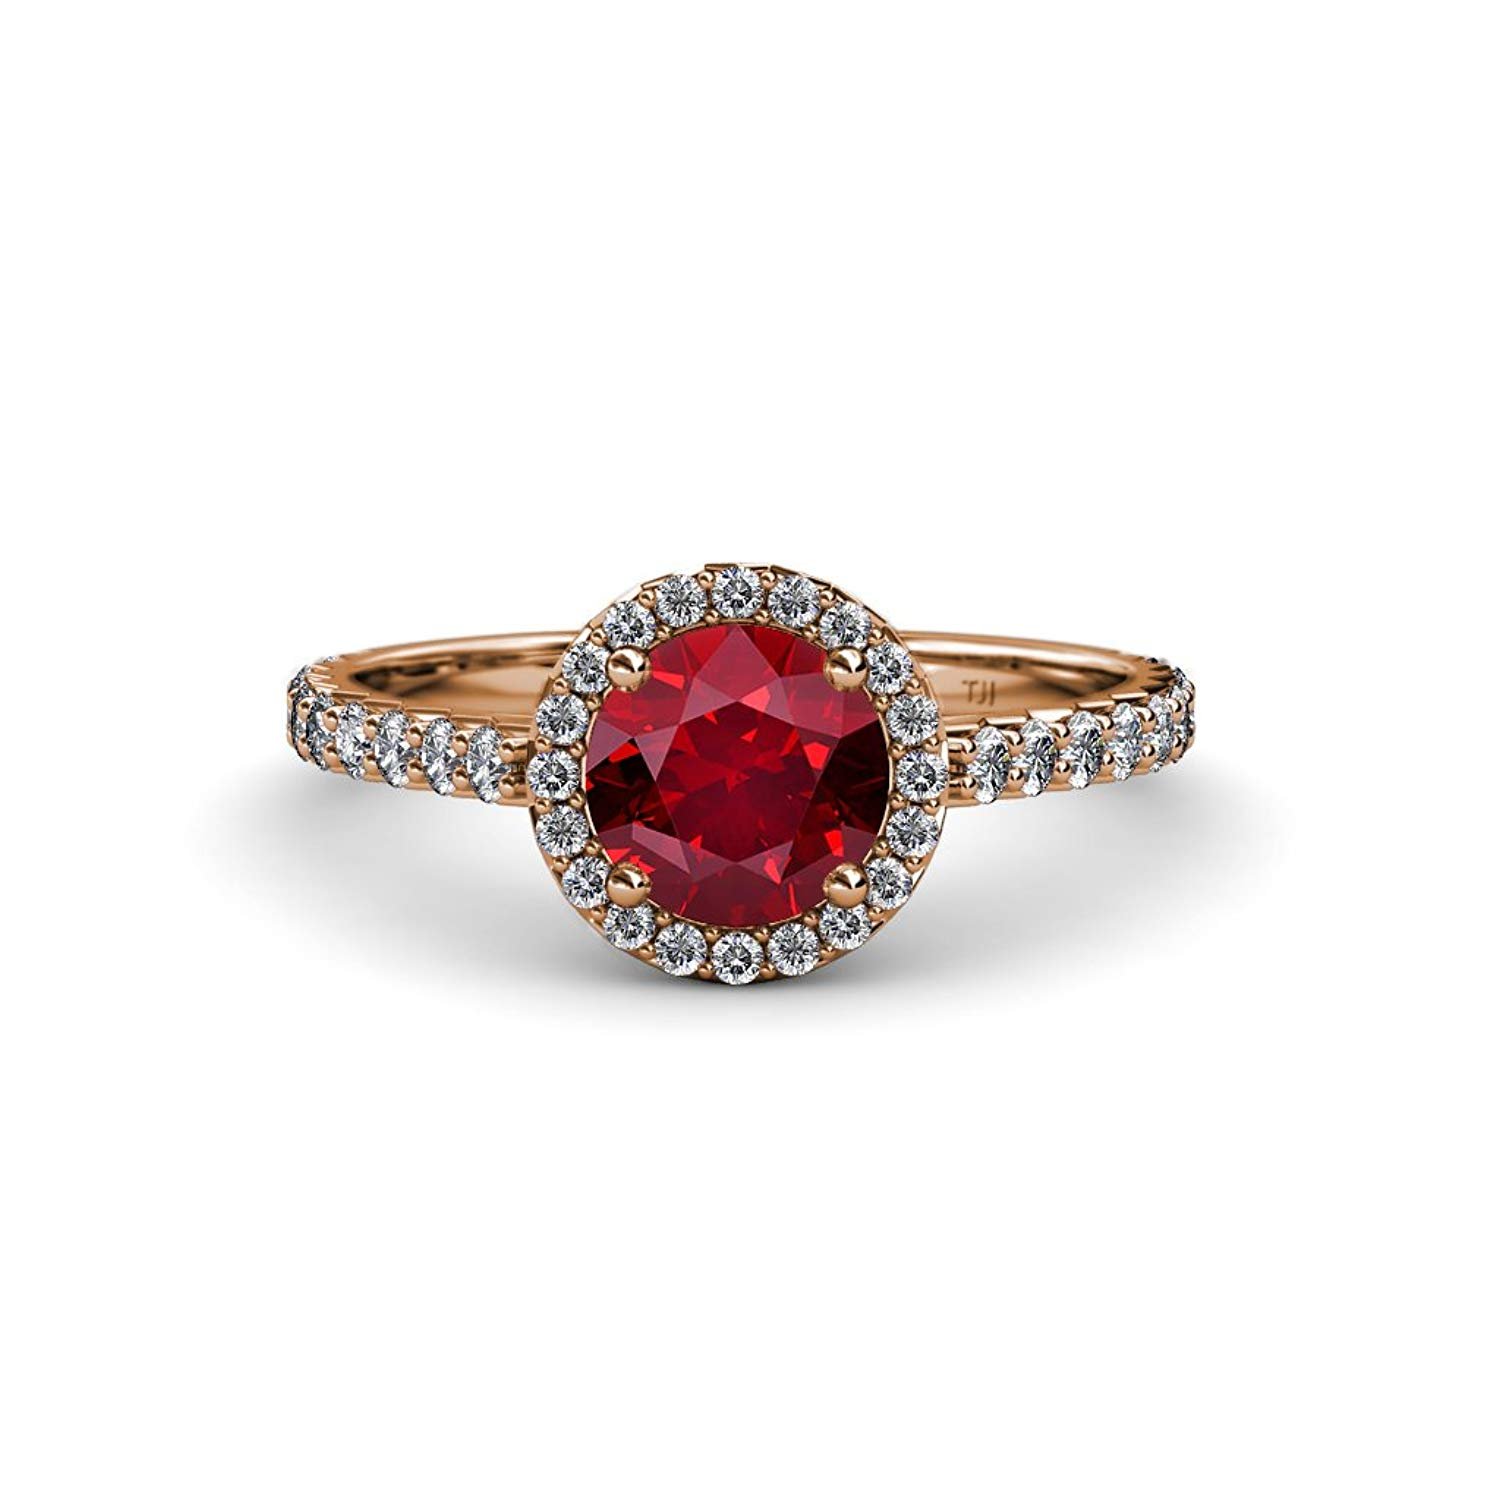 Ruby and Diamond (SI2-I1, G-H) Halo Engagement Ring 1.33 ct tw in 14K Rose Gold.size 8.5 - image 2 of 8